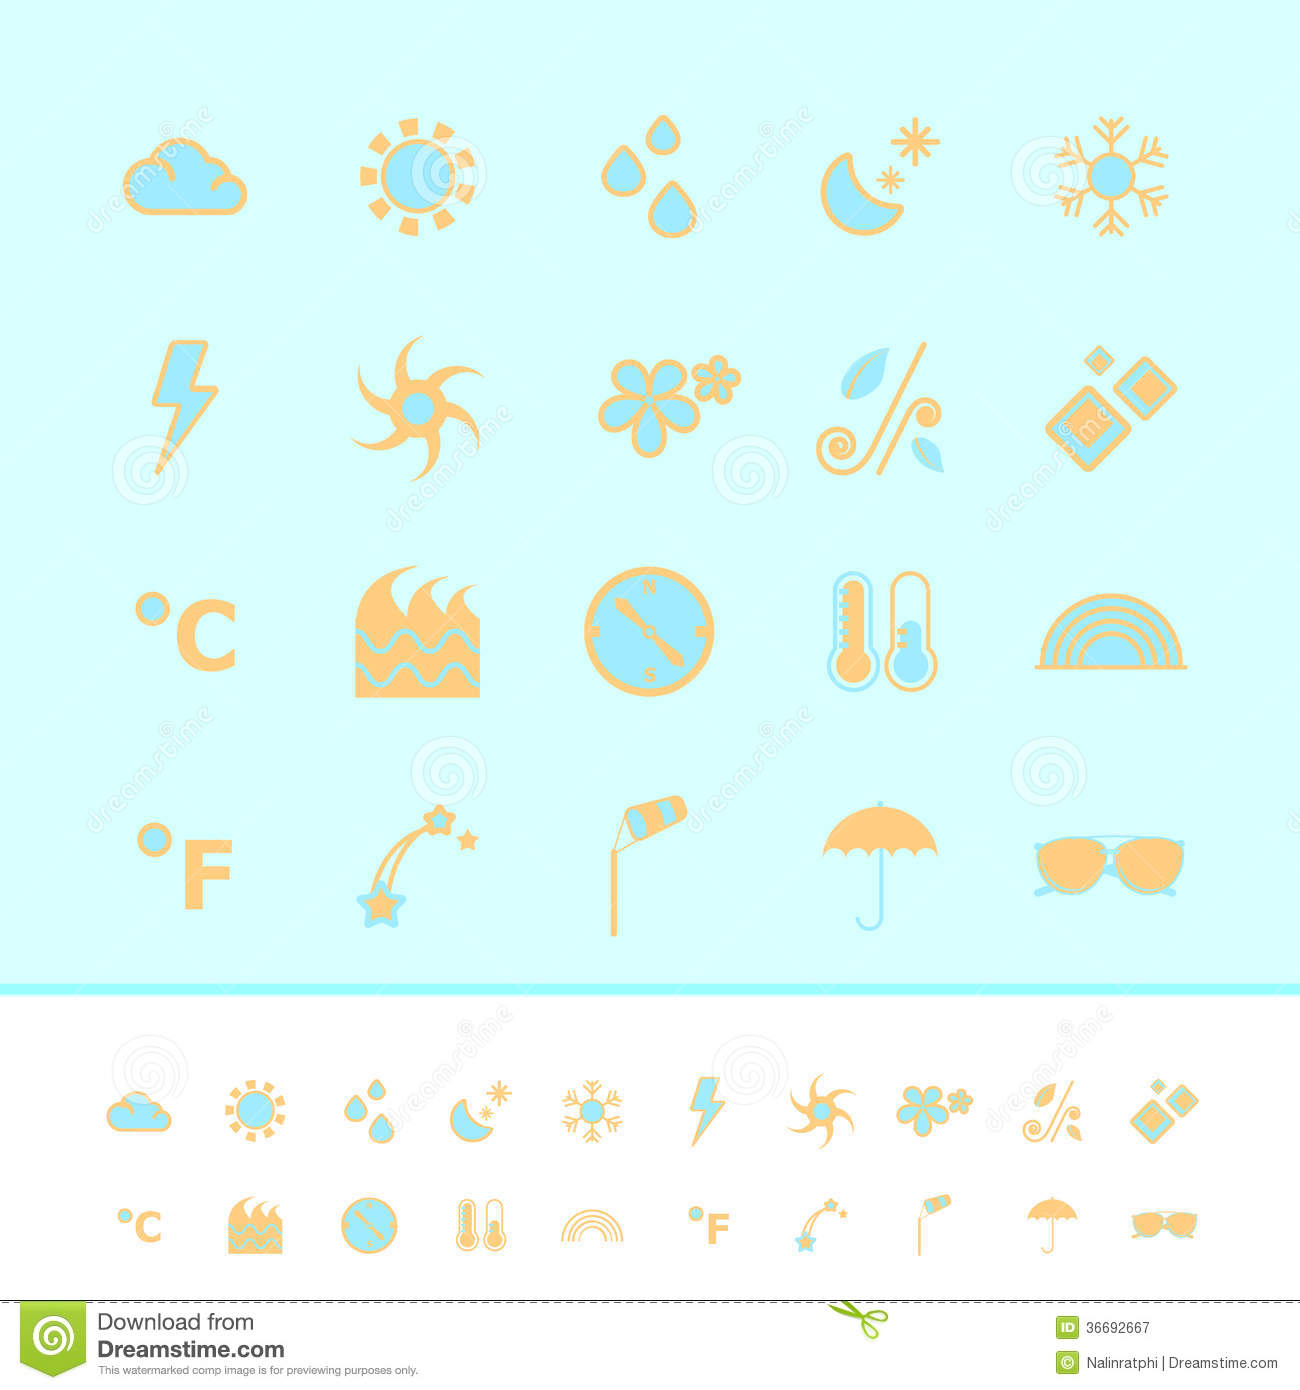 9 Weather Icon Blue Images - Weather Icons, Cool Weather Icon and